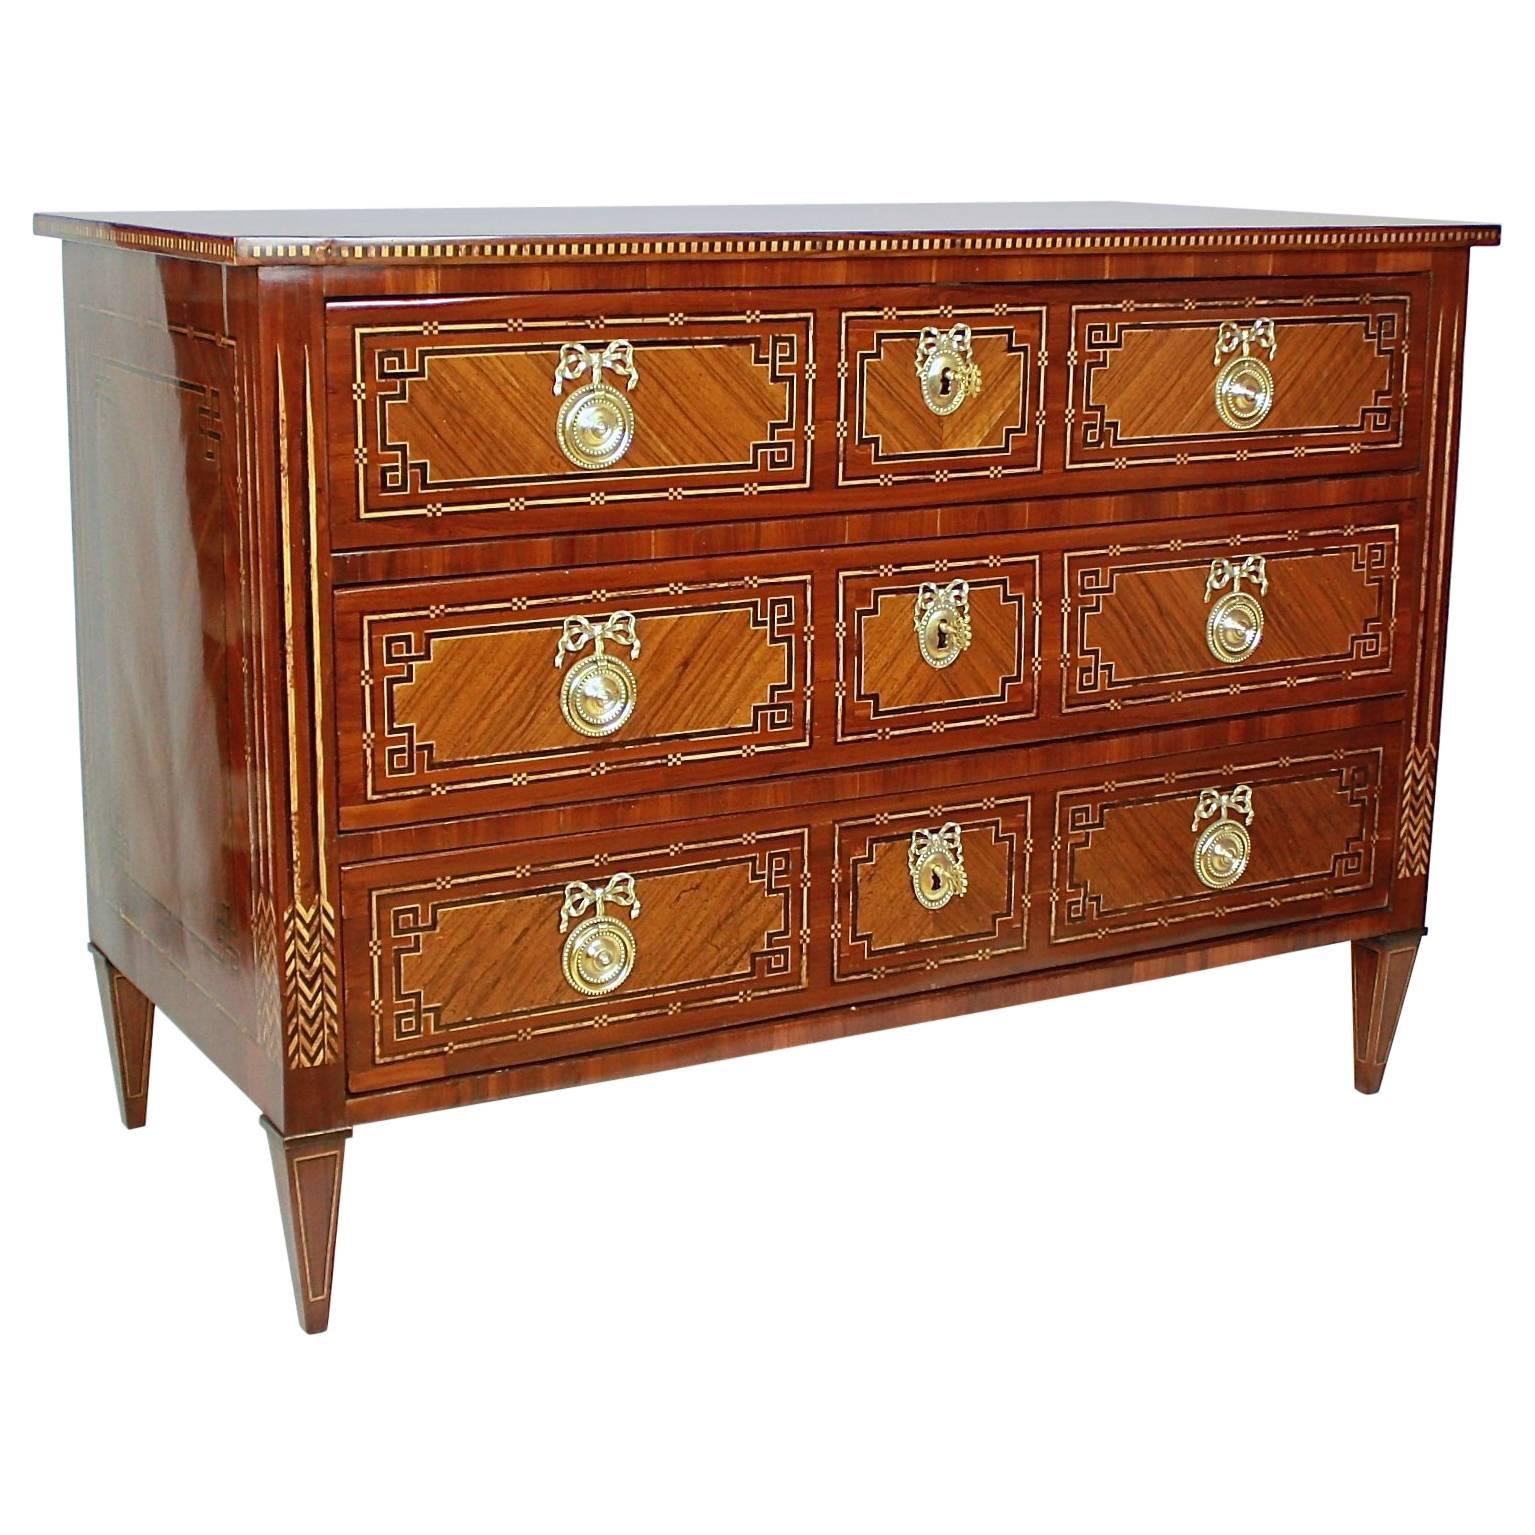 Eastern French 18th Century Neoclassical Marquetry Commode, circa 1780